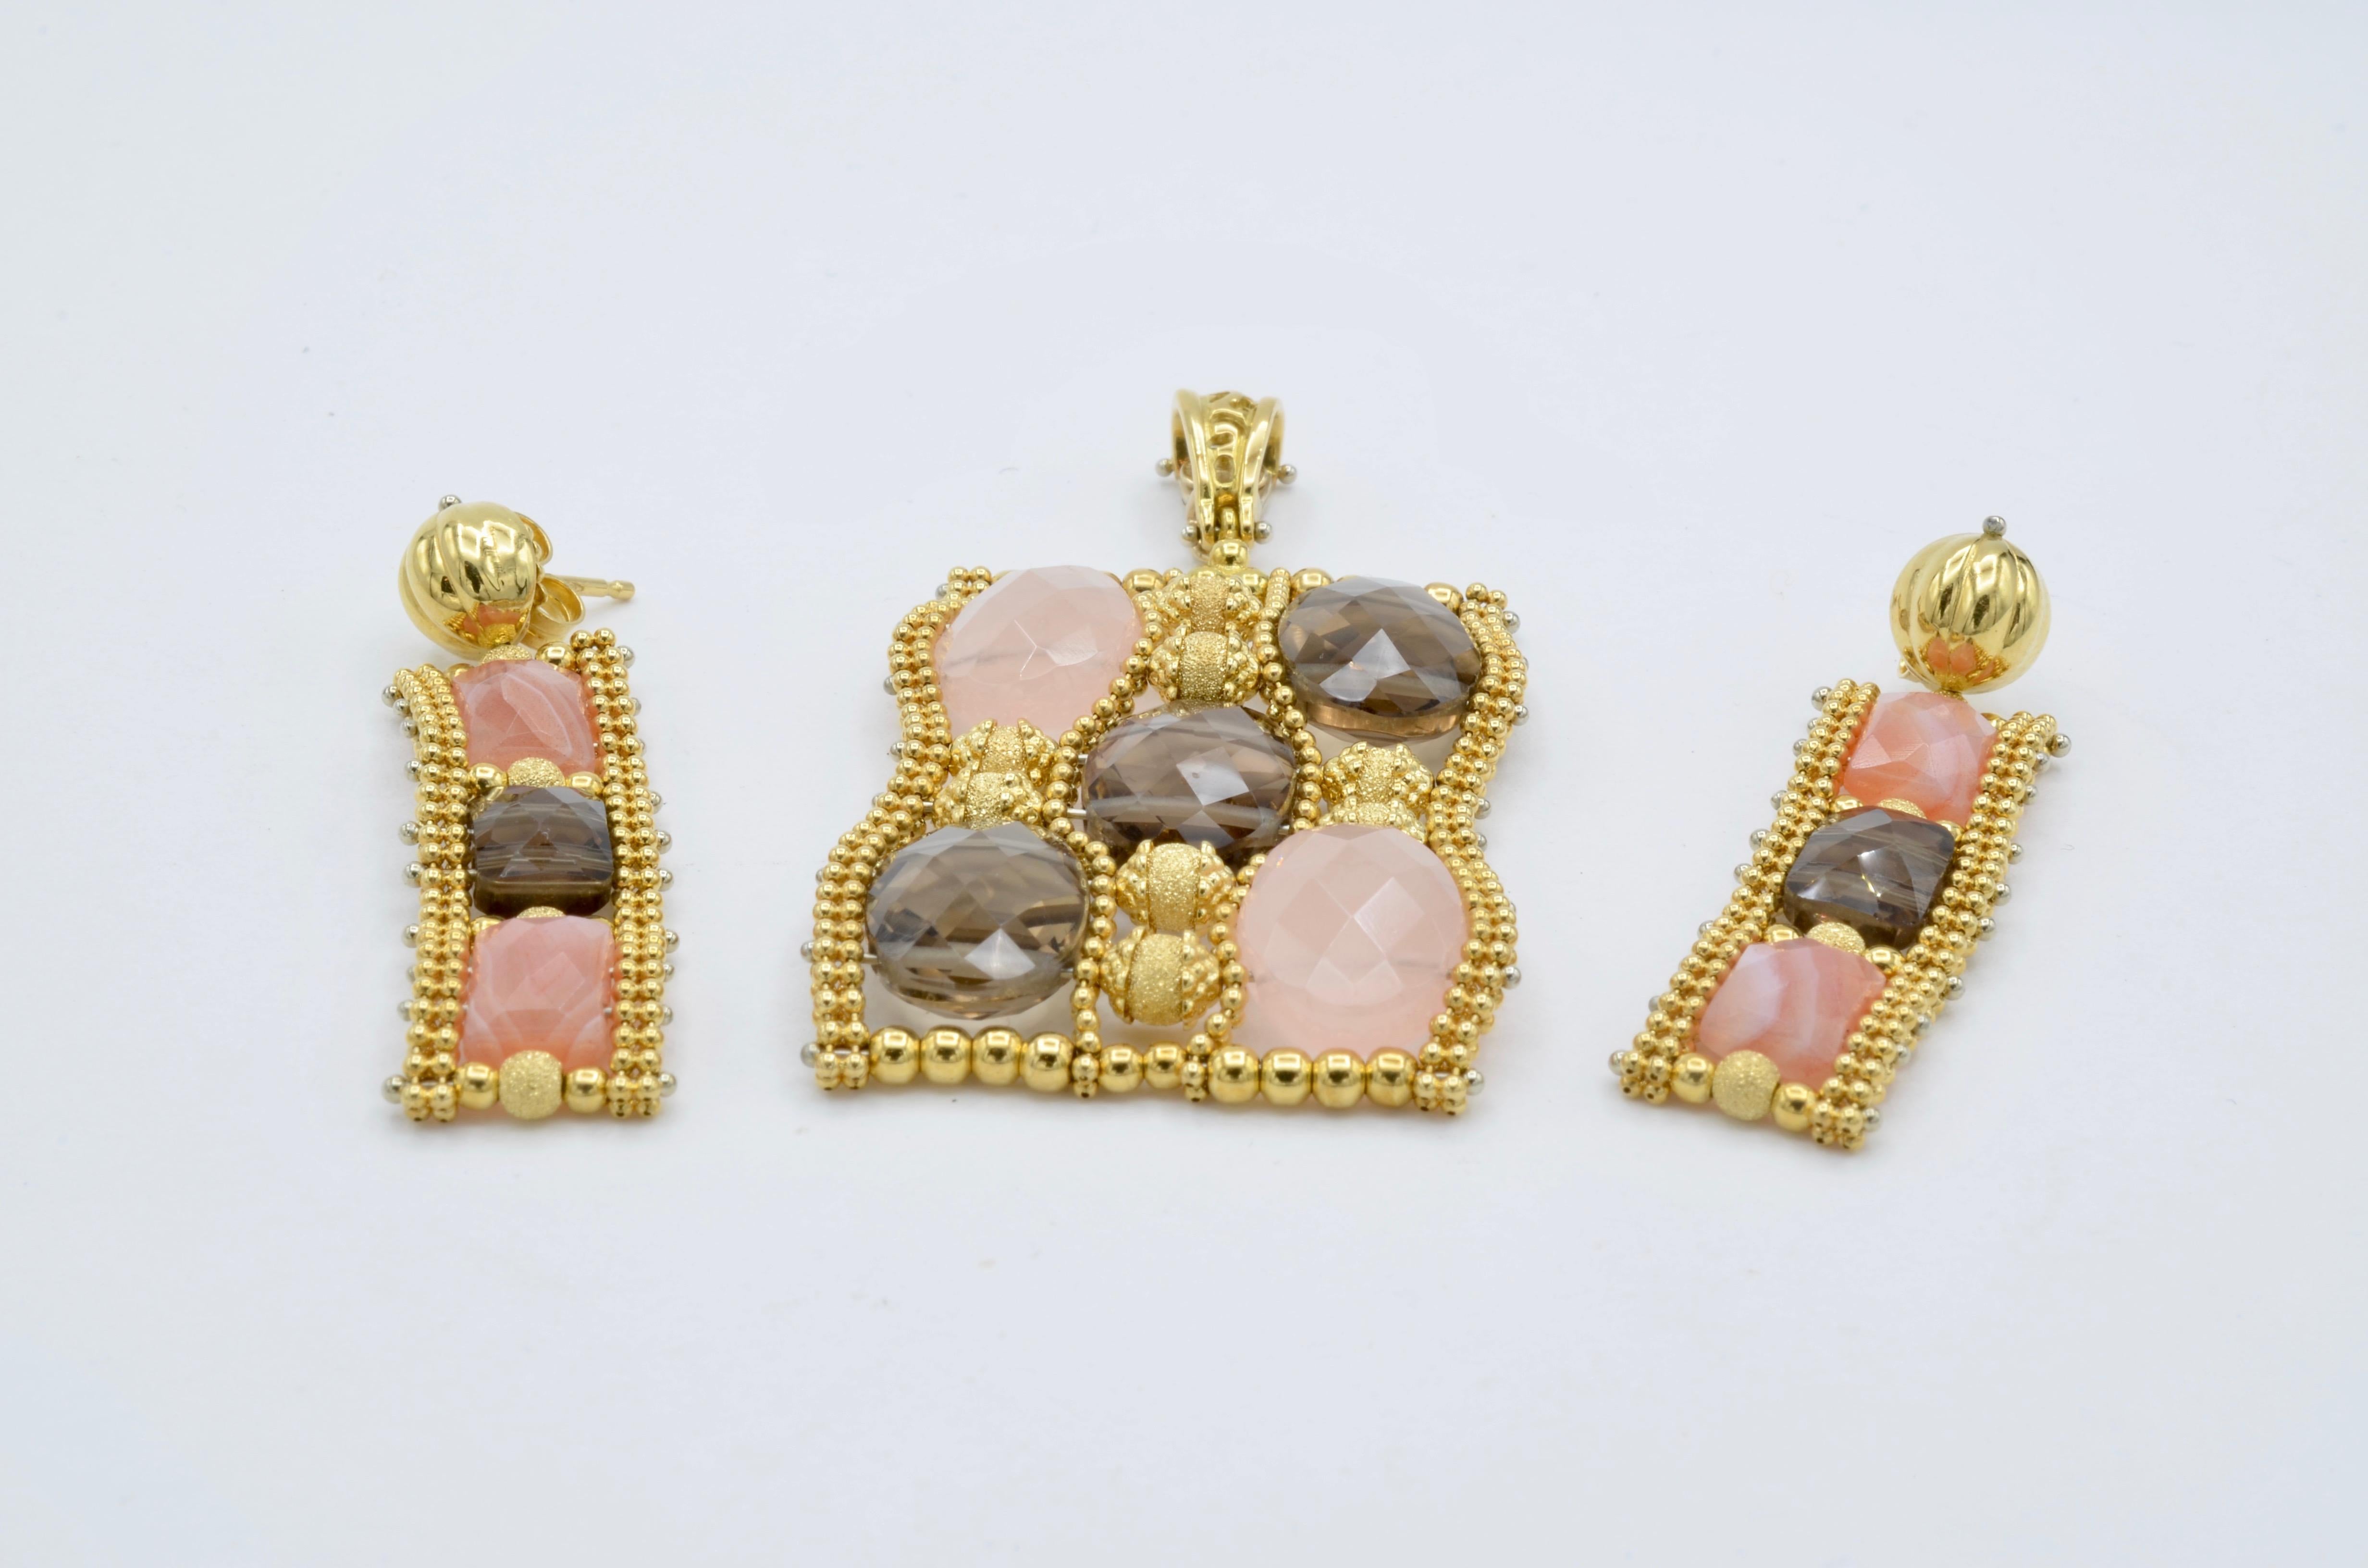 This color combination is neutral and fun. The pink beautifully gleams in the 14k gold setting of beaded texture. The pendant and earrings are flexible and have movement when you wear them.